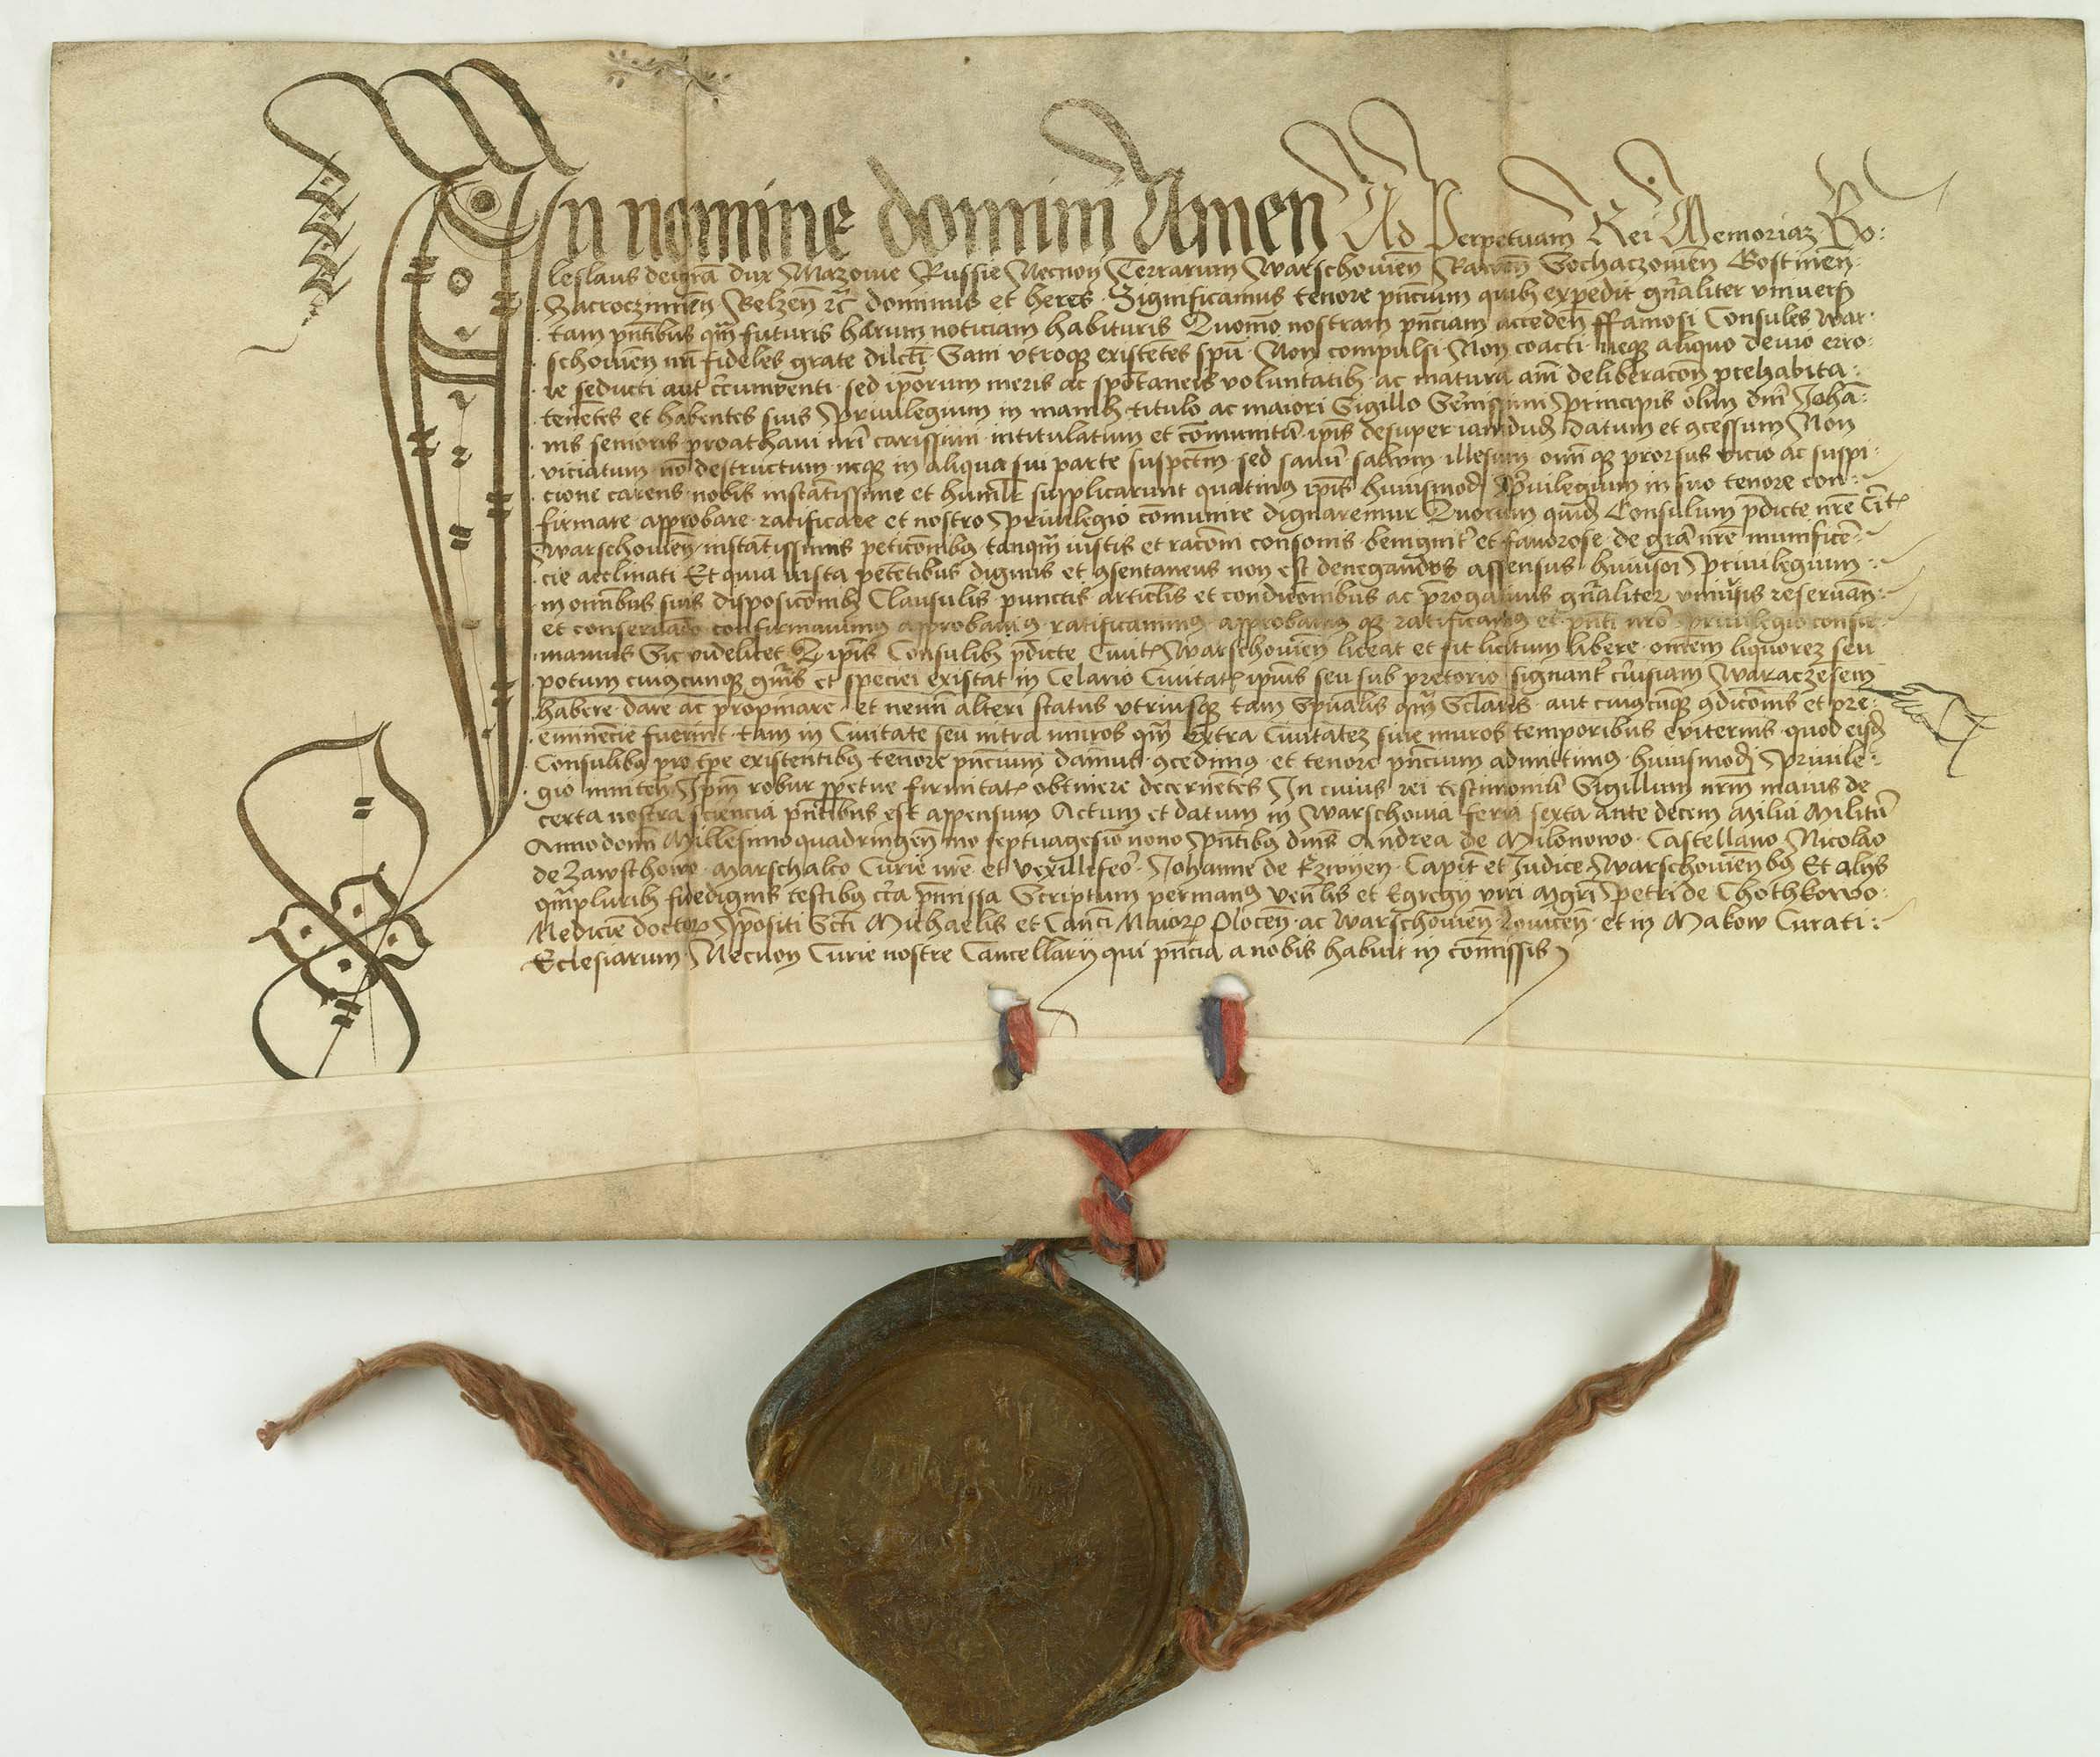 1479 document by Boleslaw V, confirming the beer privilege of 1478, courtesy of the Central Archives of Historical Records, no. 1535